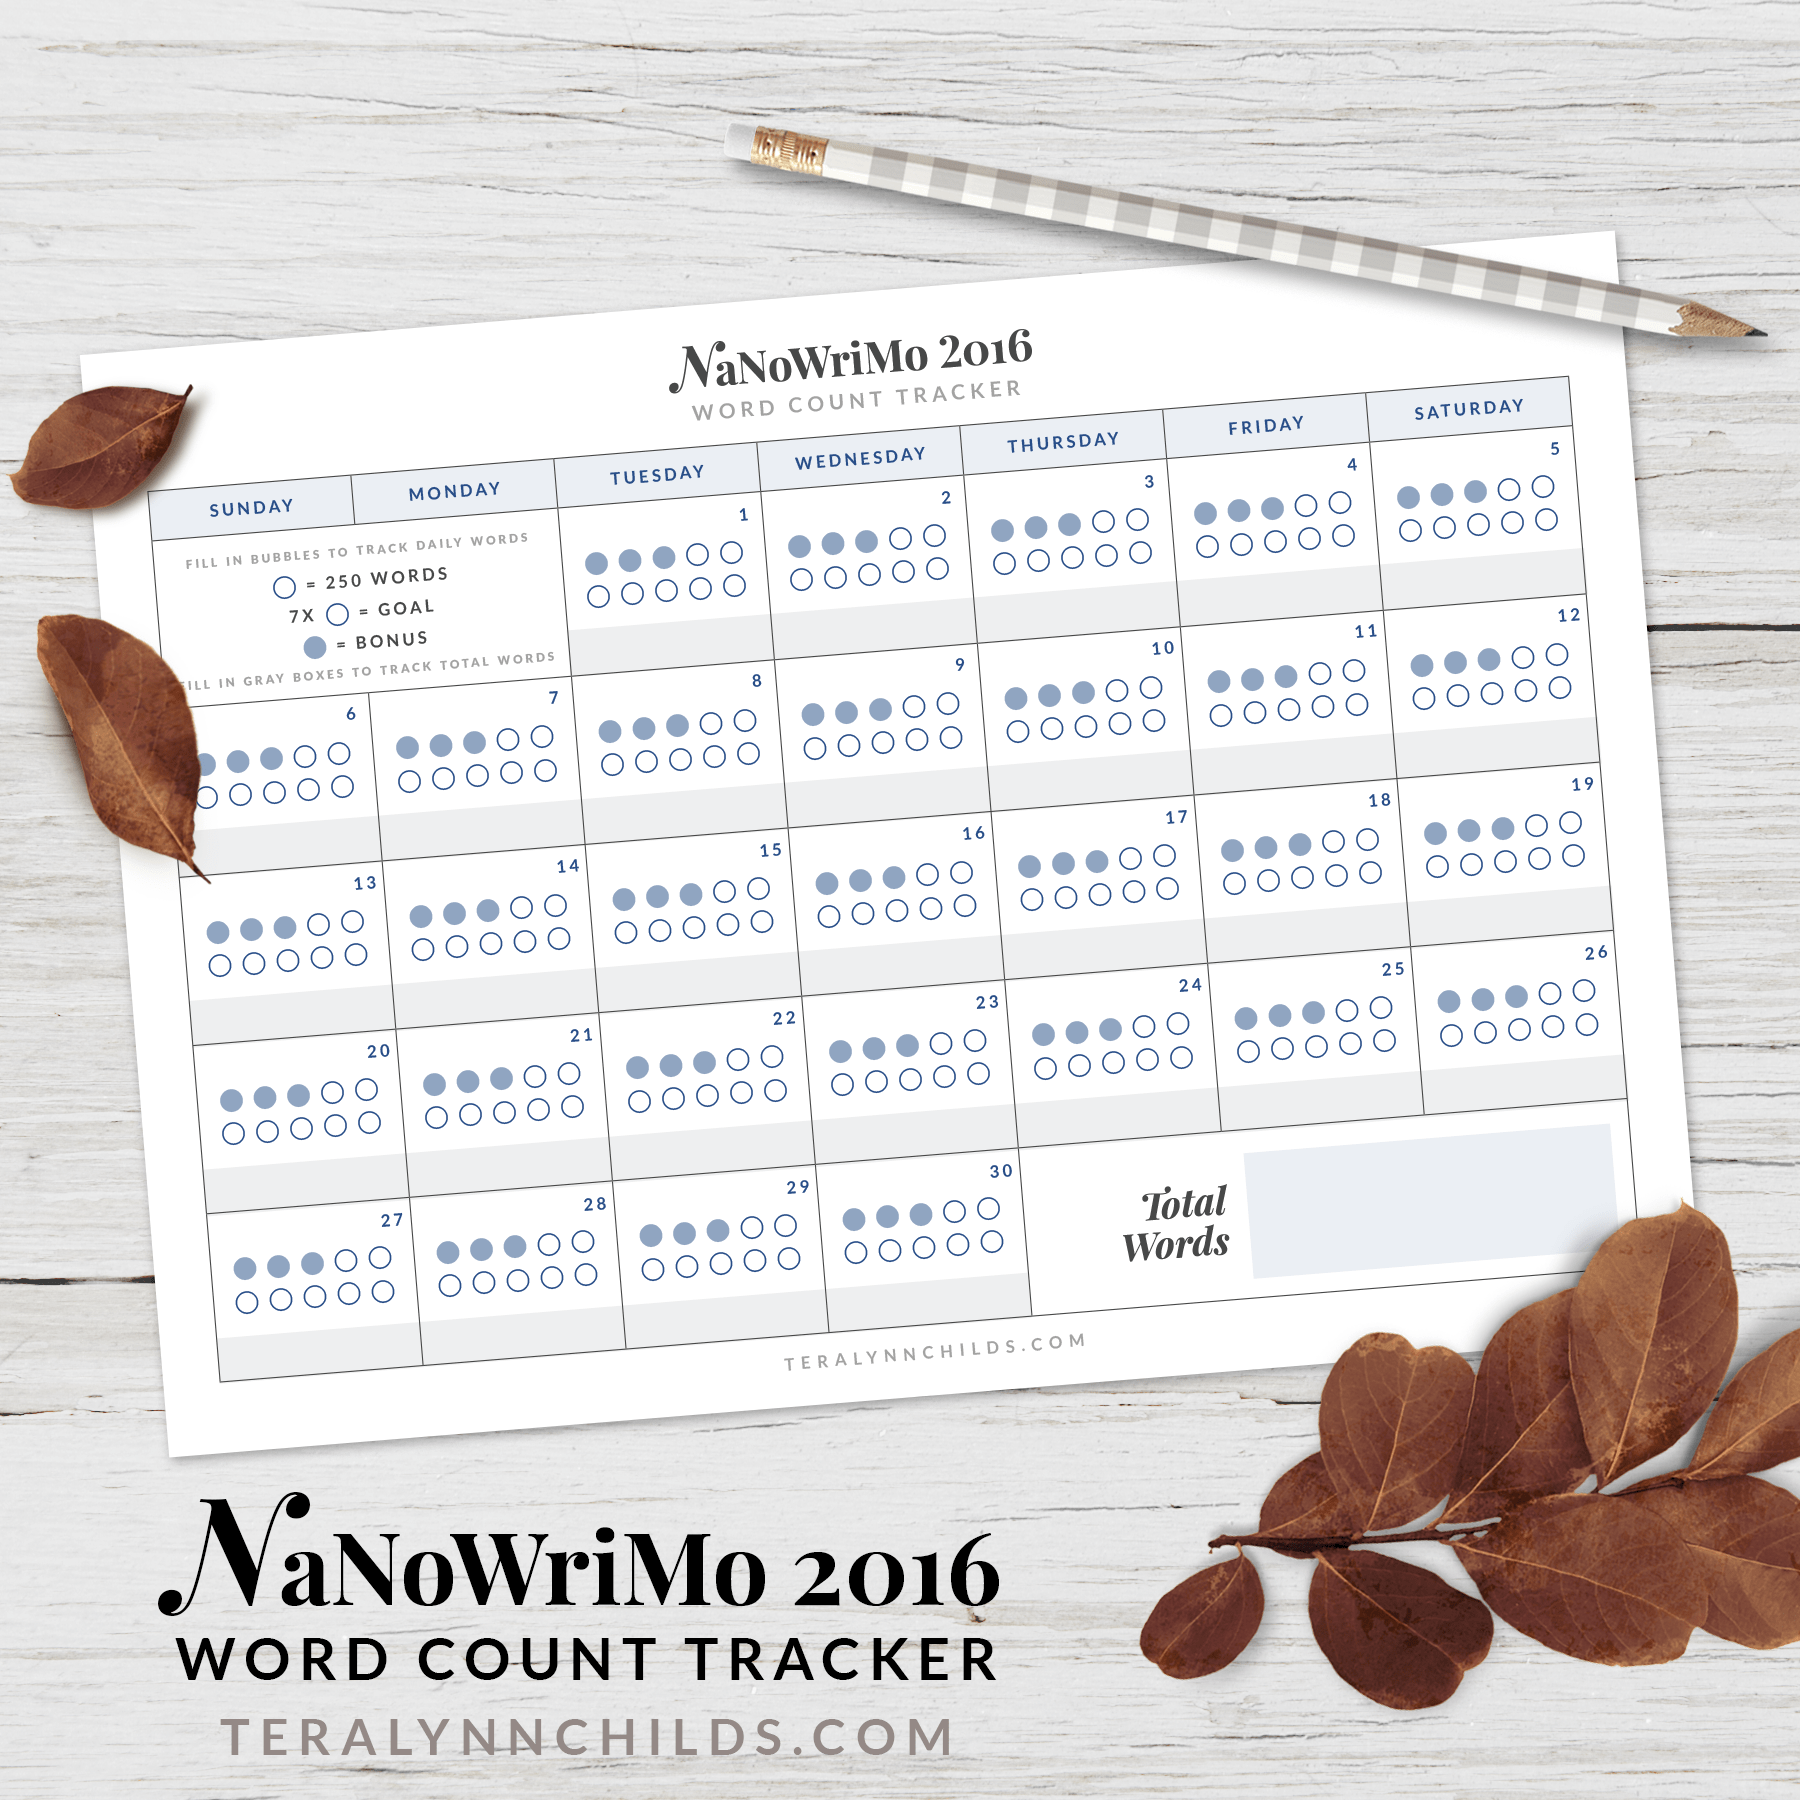 Free printable NaNoWriMo 2016 Word Count Tracker from Tera Lynn Childs.